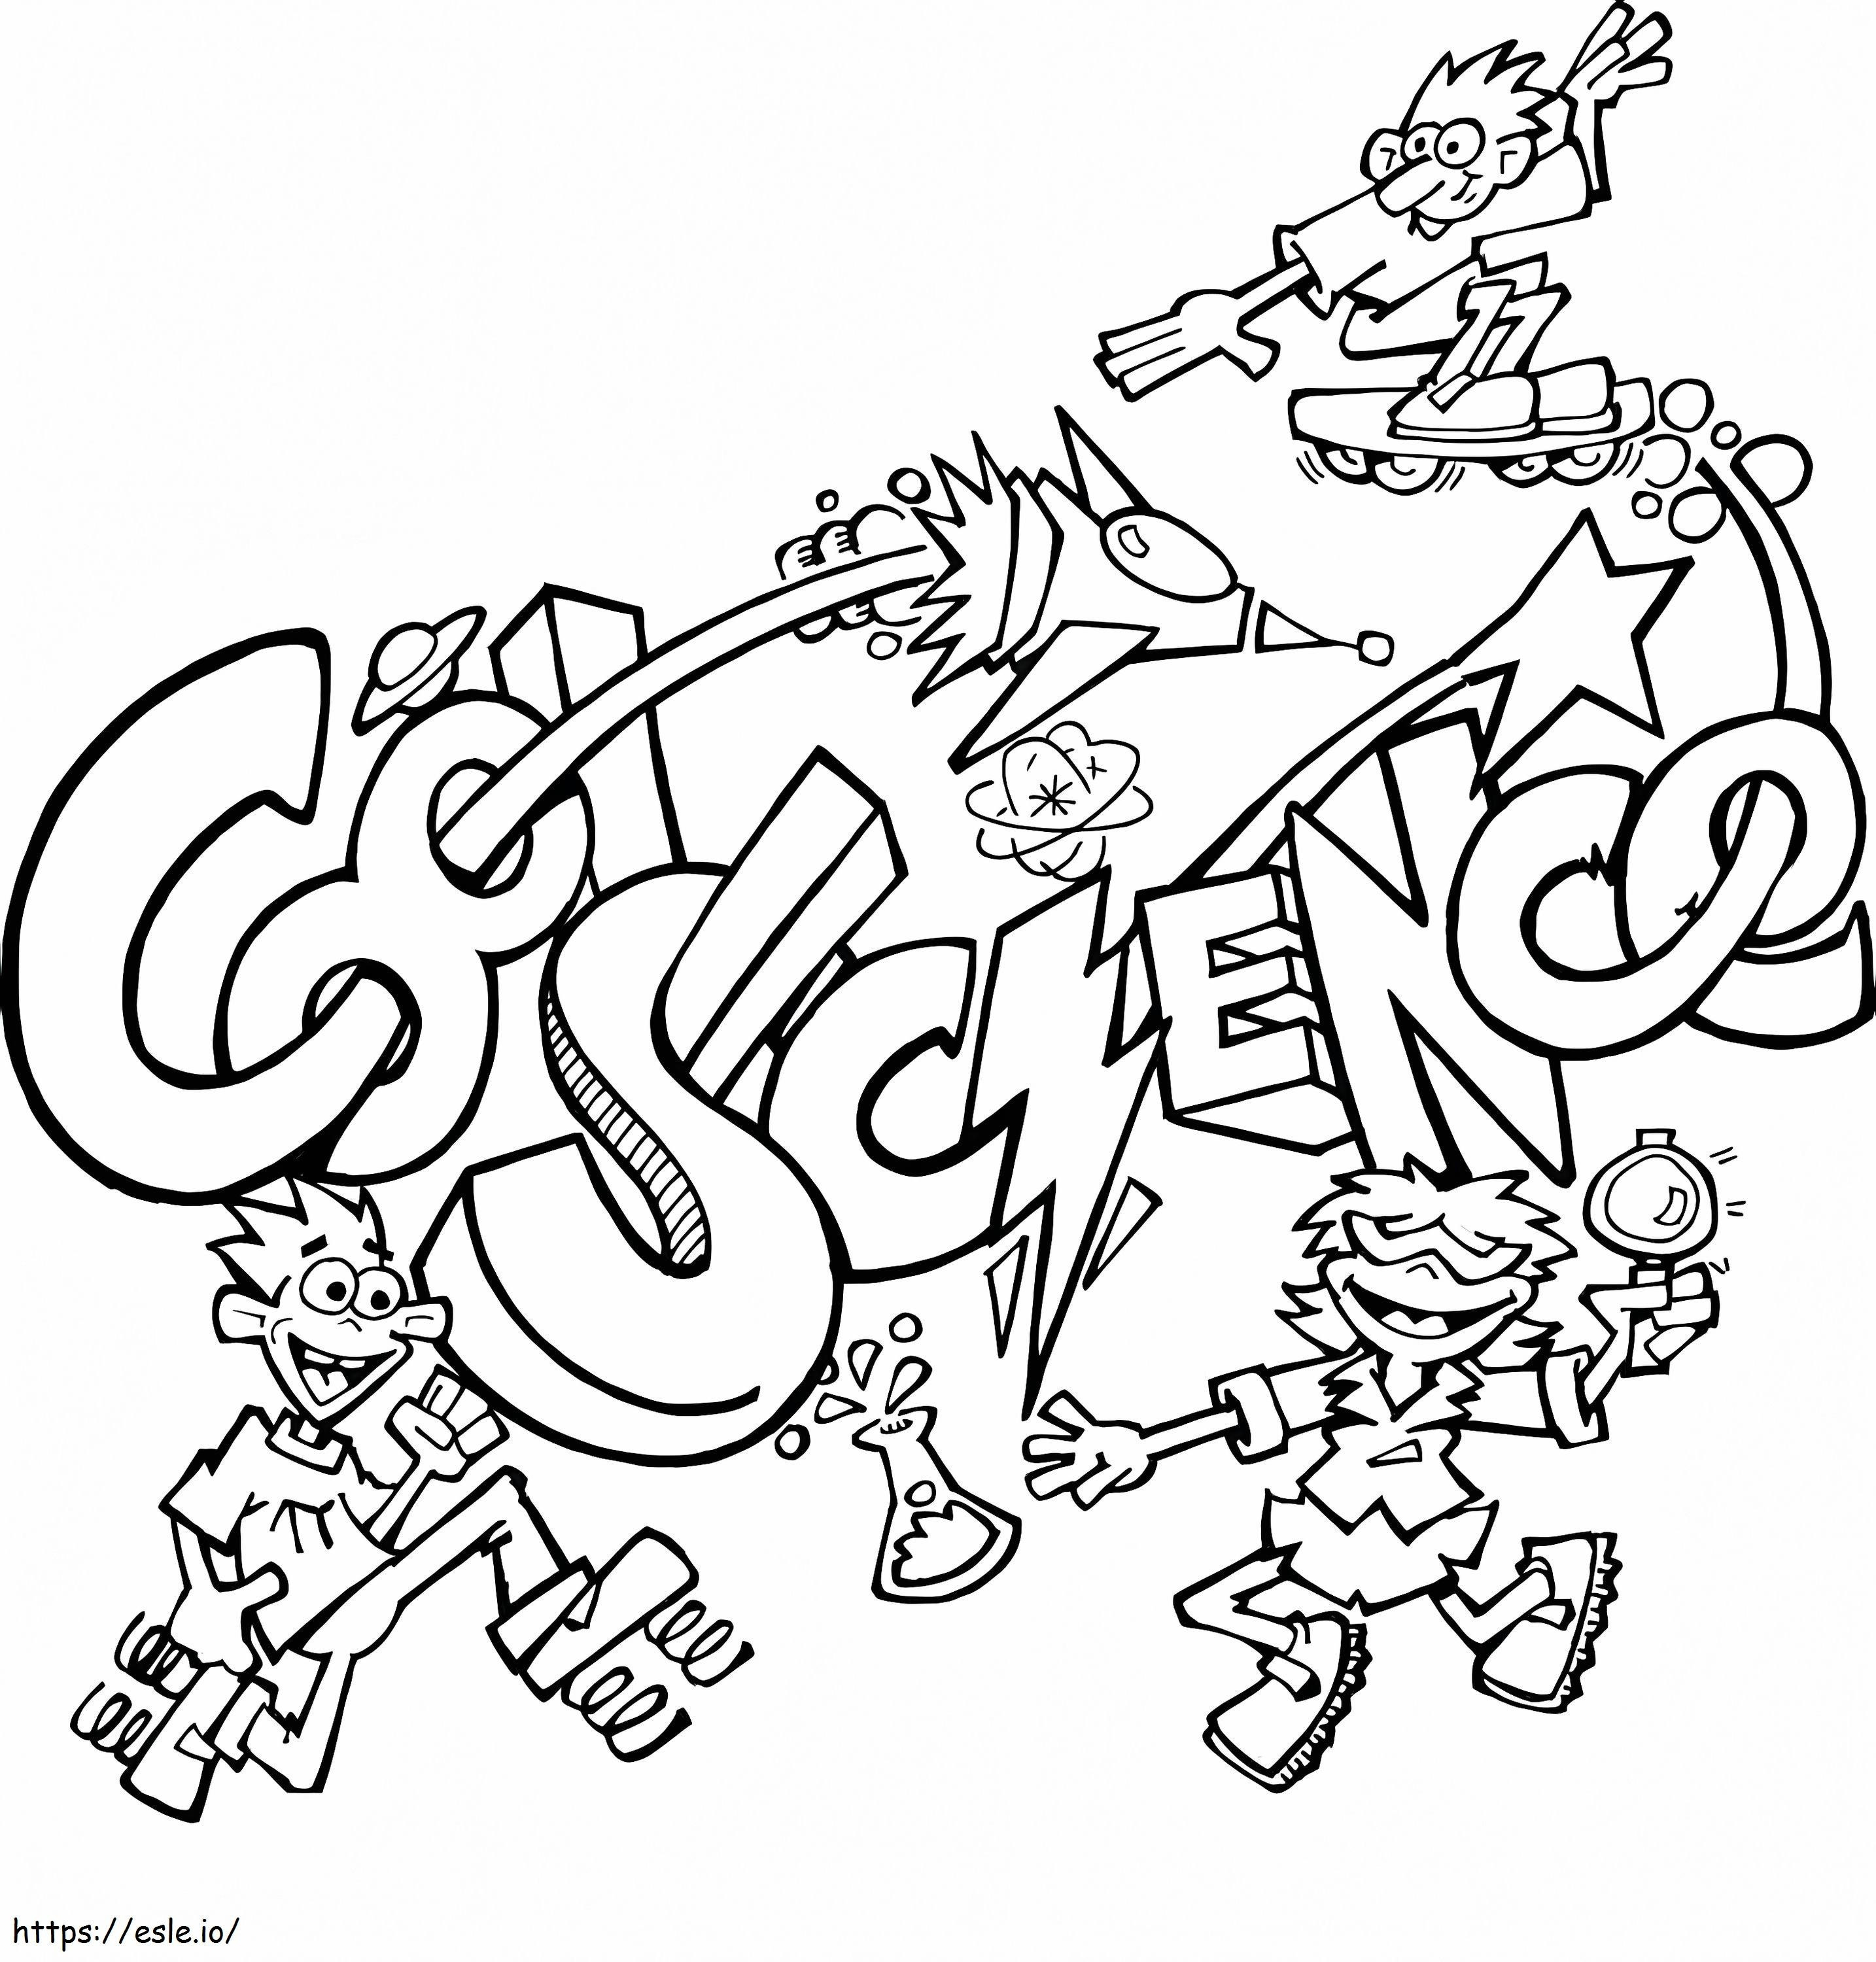 Cool Science coloring page